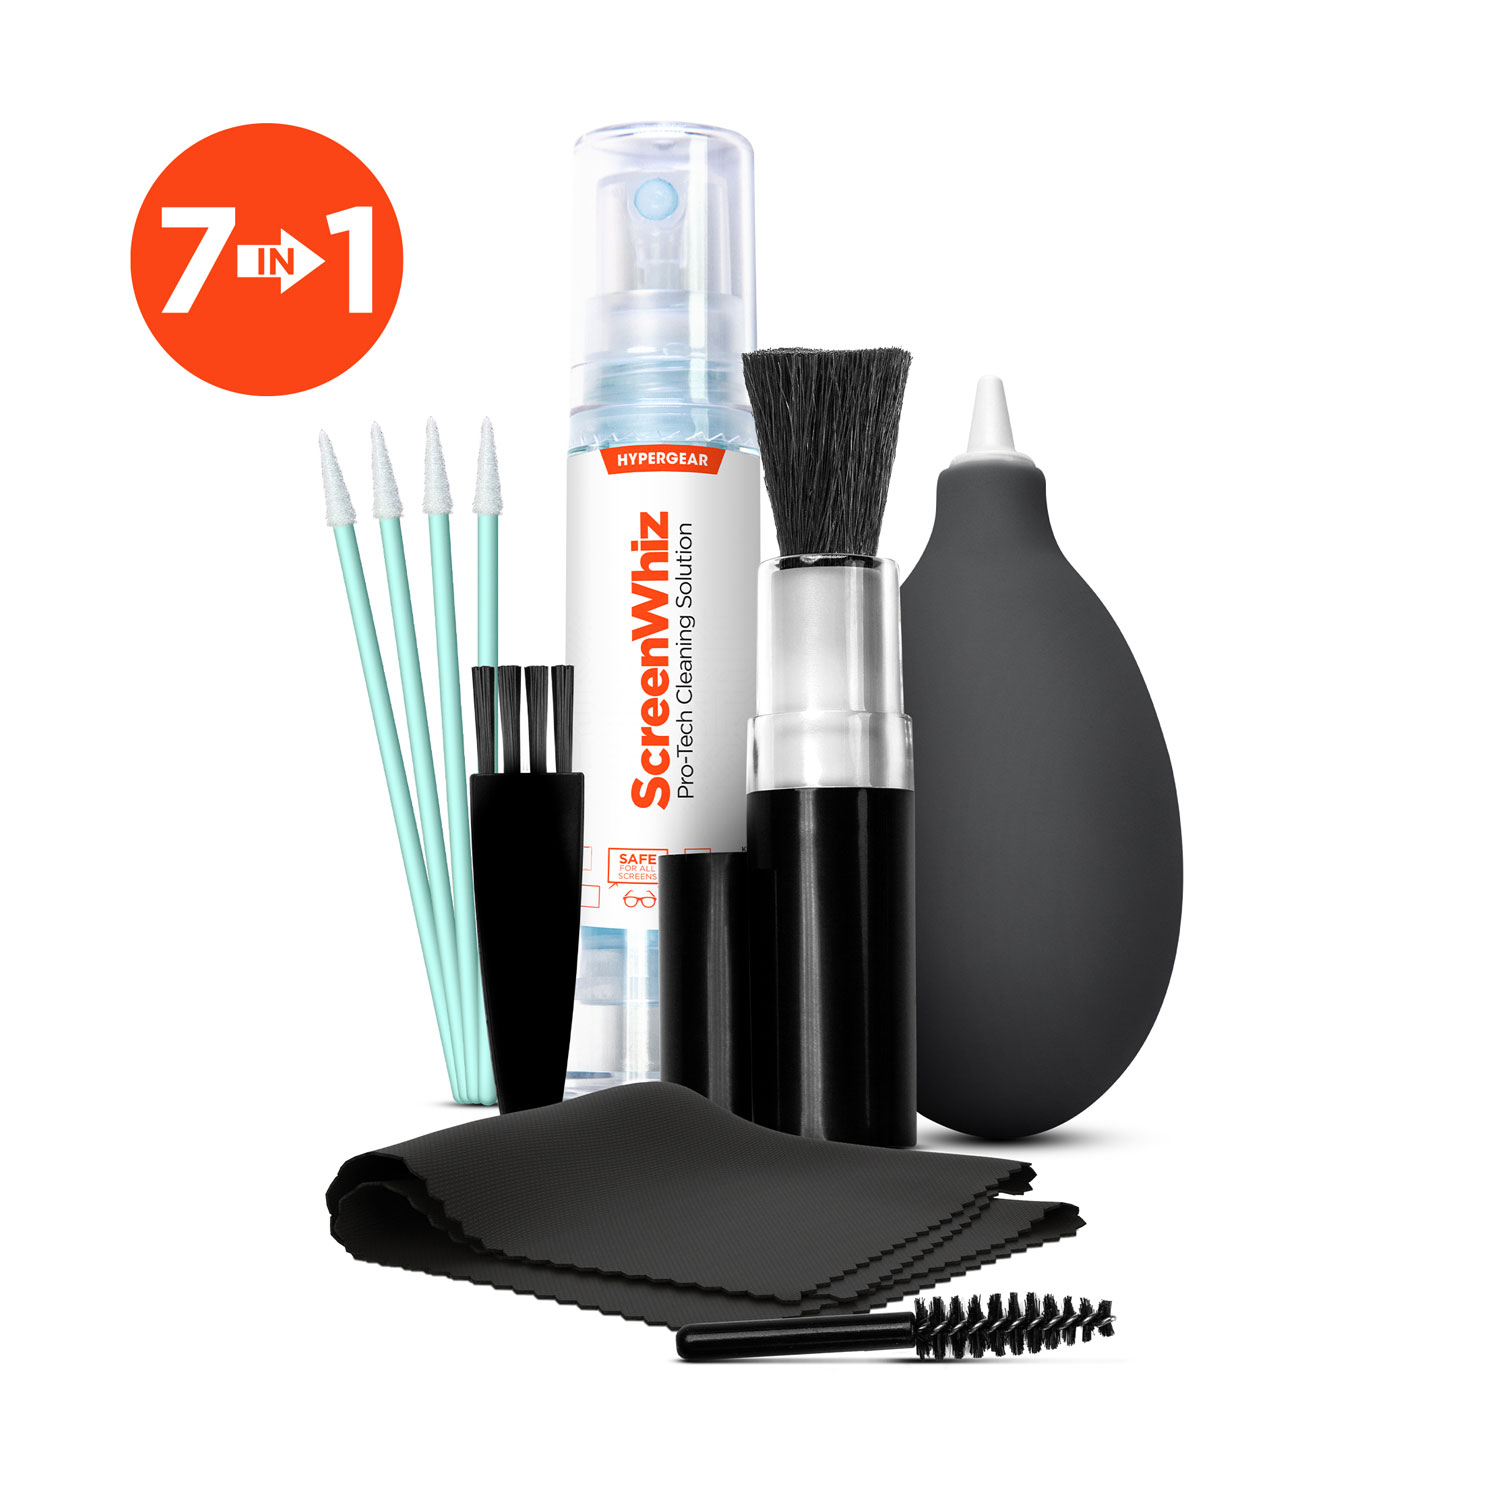 ScreenWhiz 7-in-1 Complete Cleaning Kit